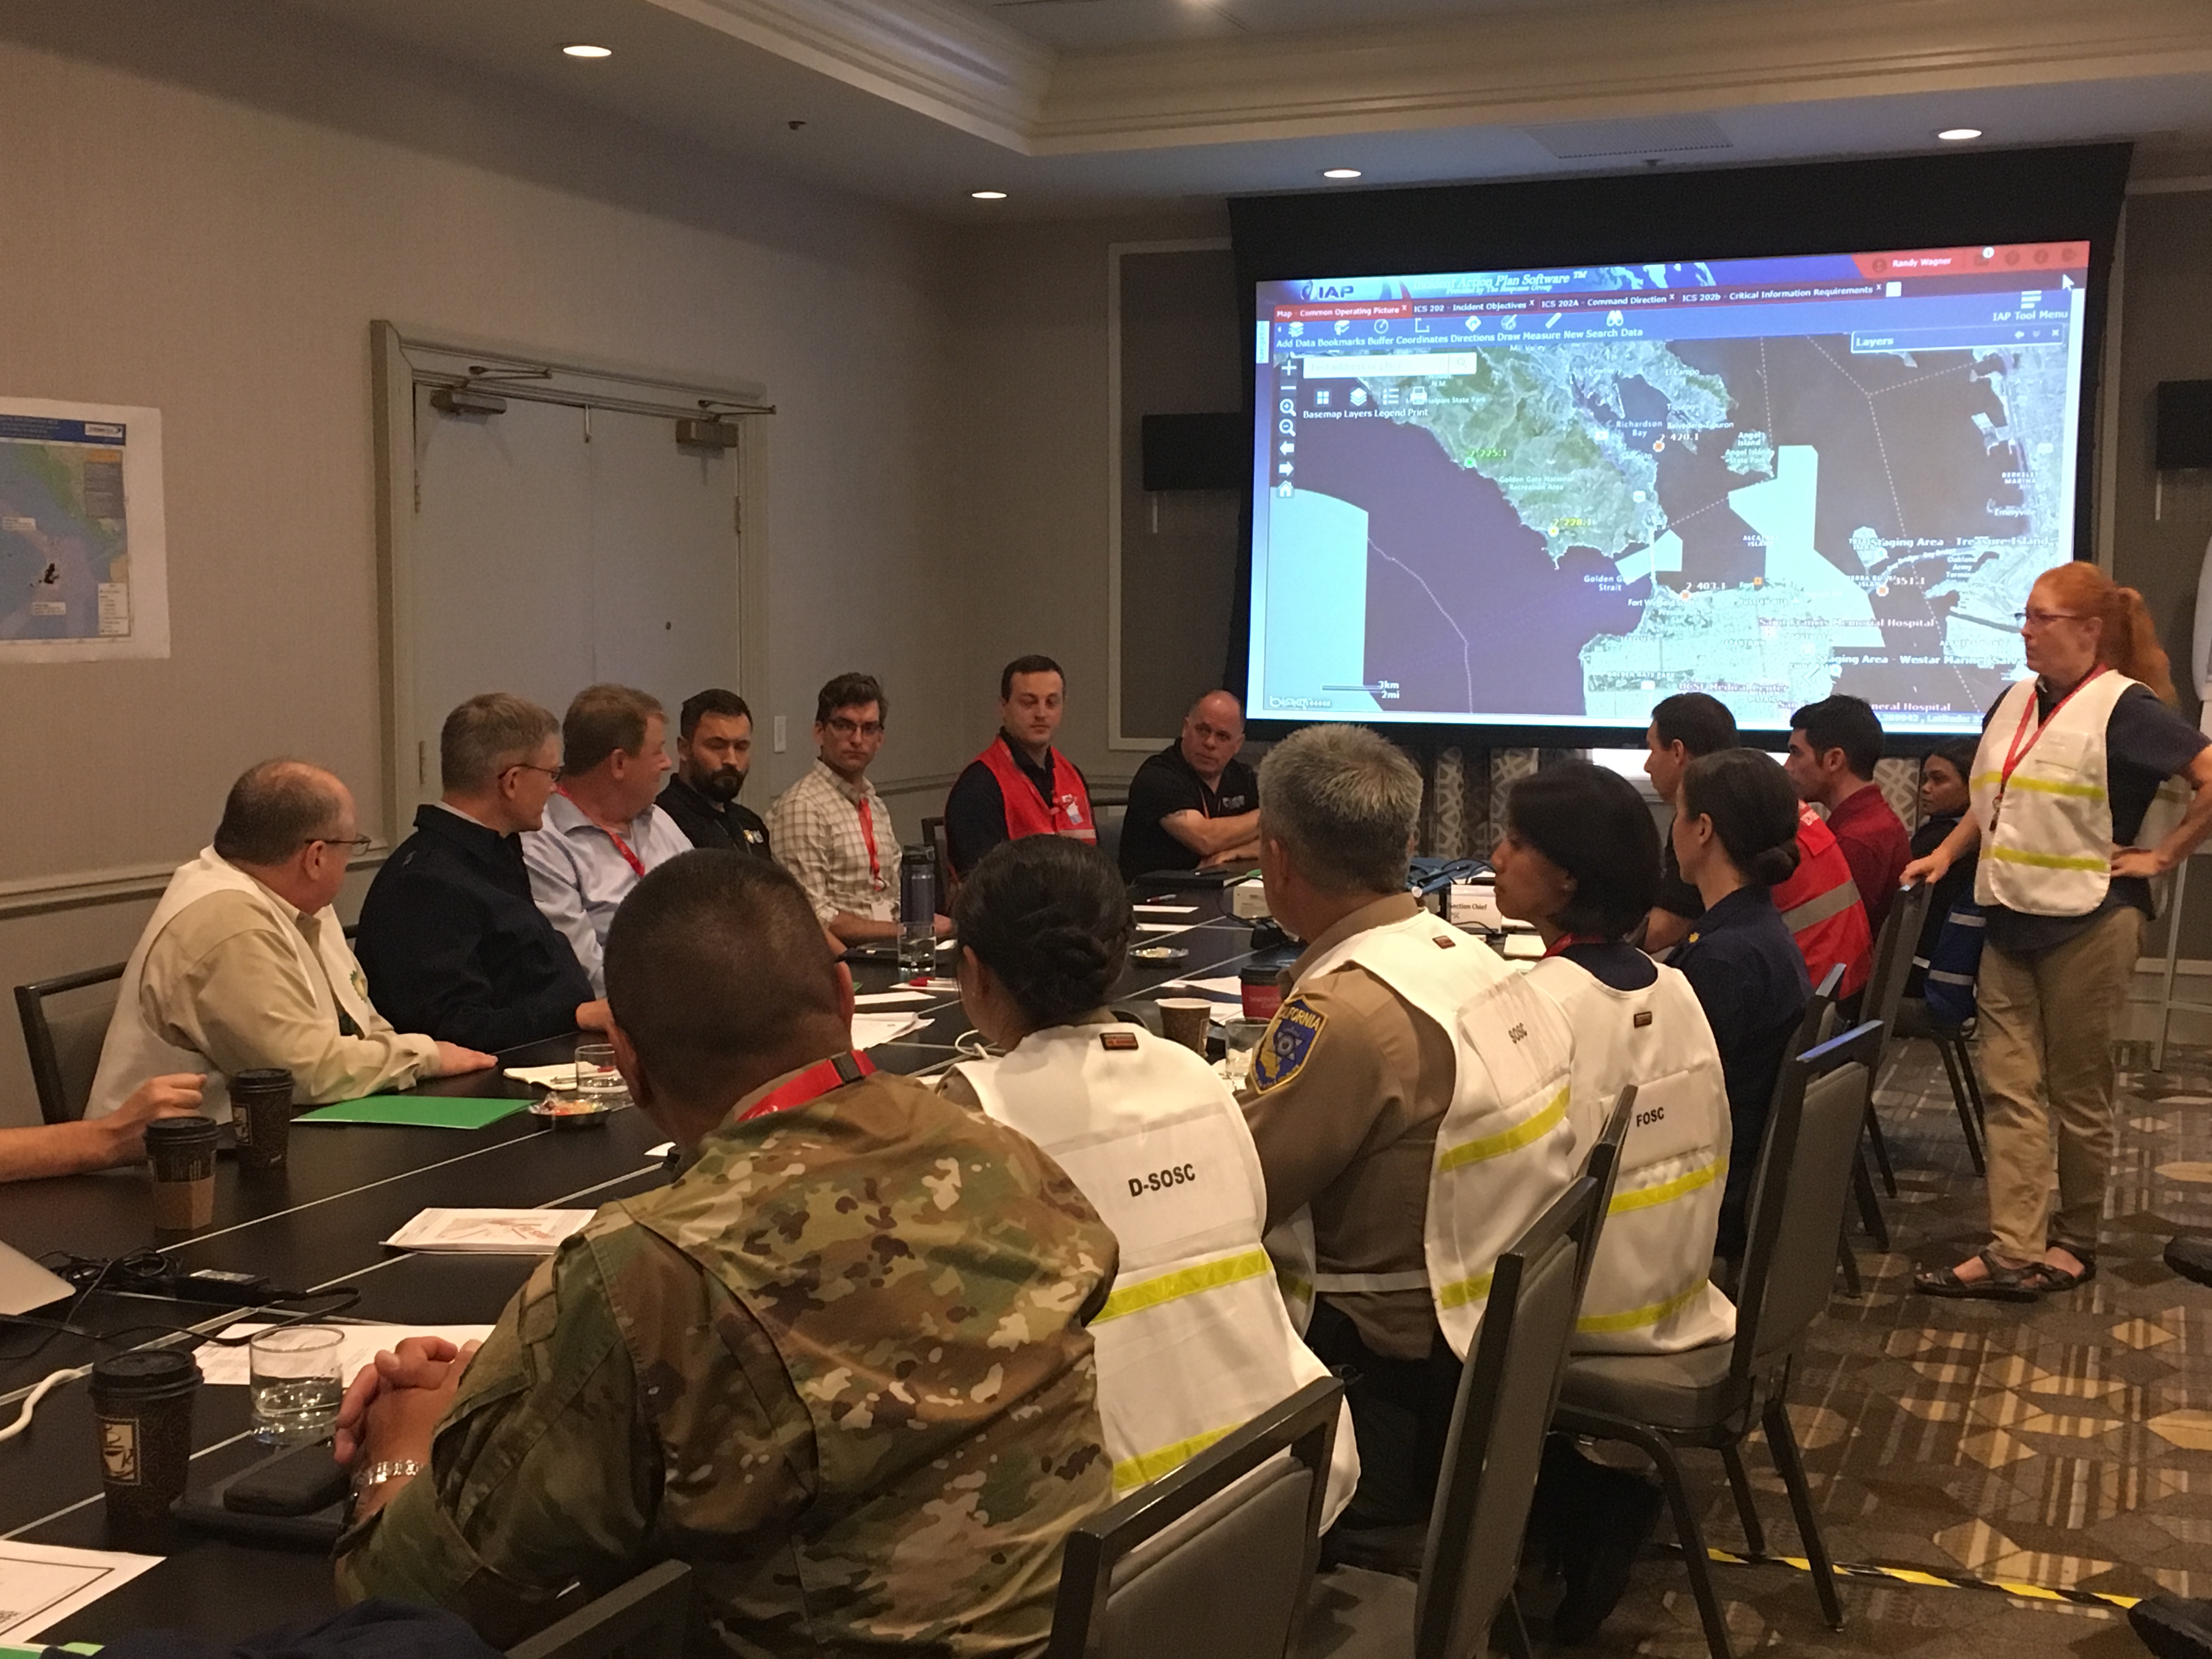 agency officials in vests sitting at table with large map on screen